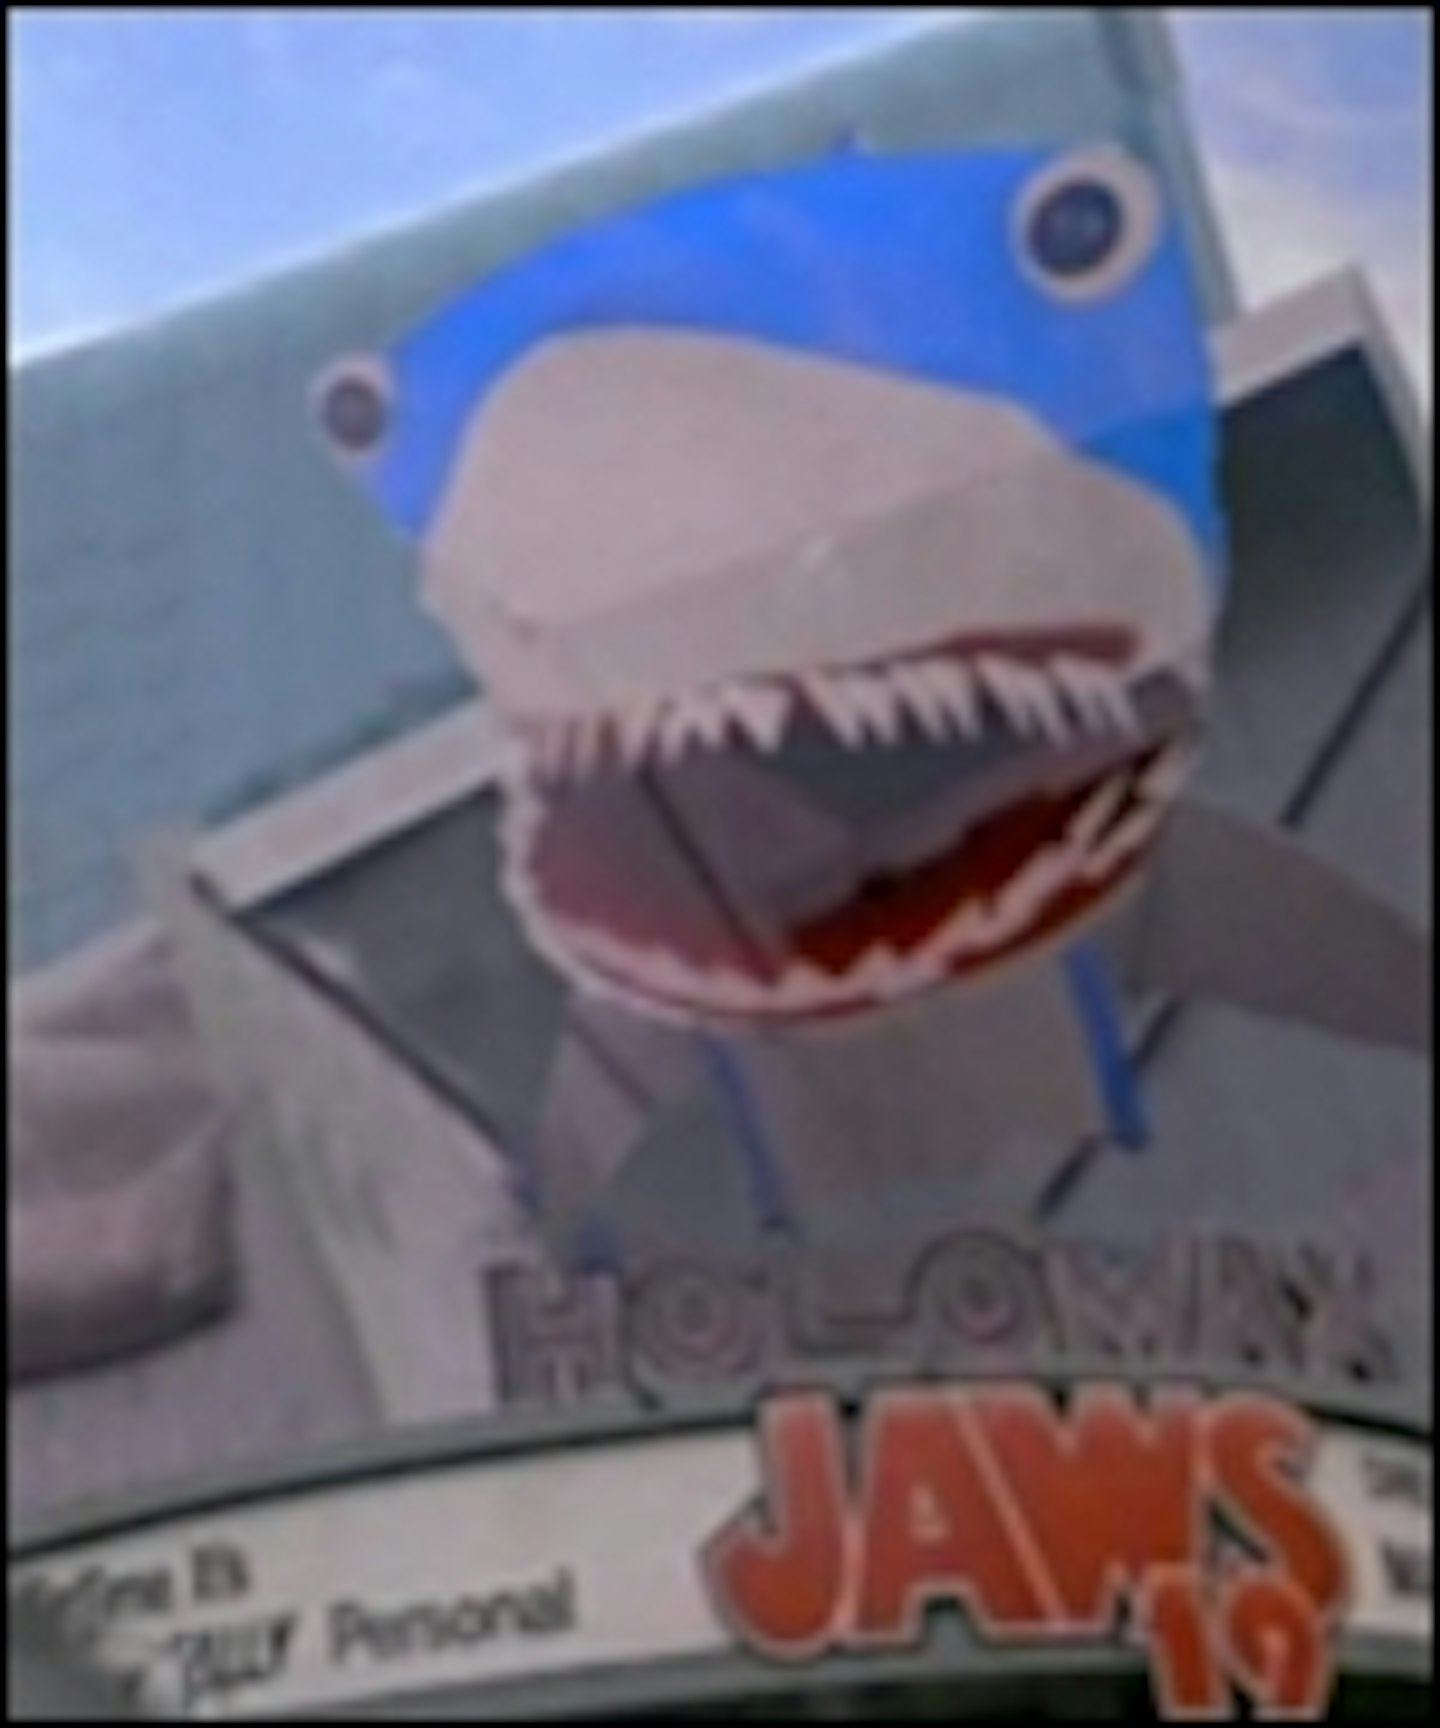 Jaws 19 Trailer Hits